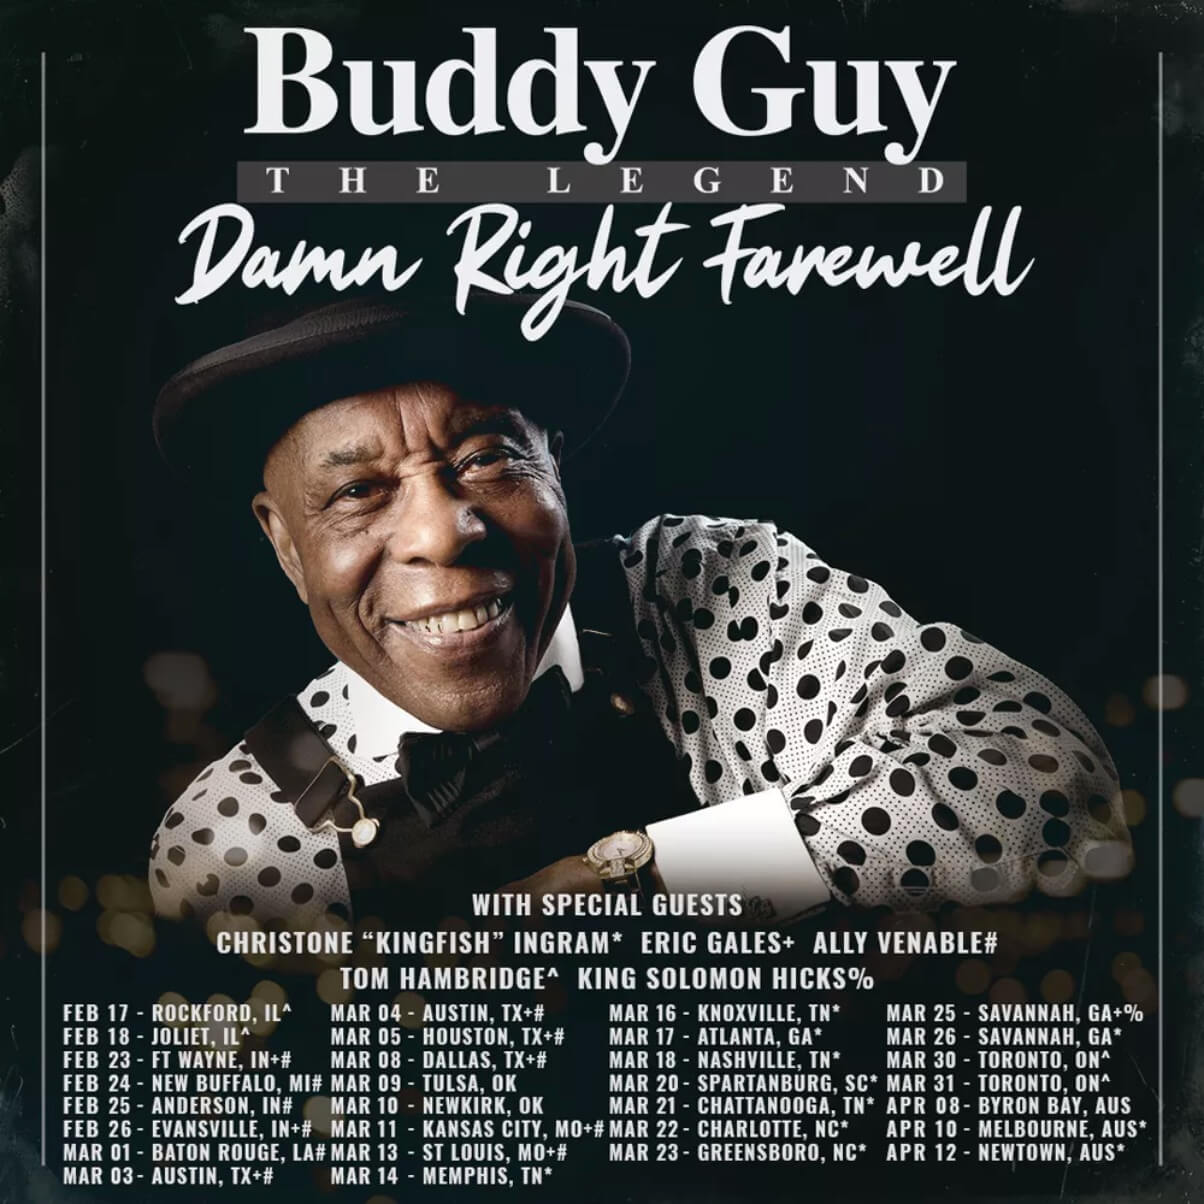 Tour dates for Buddy Guy's Damn Right Farewell Tour